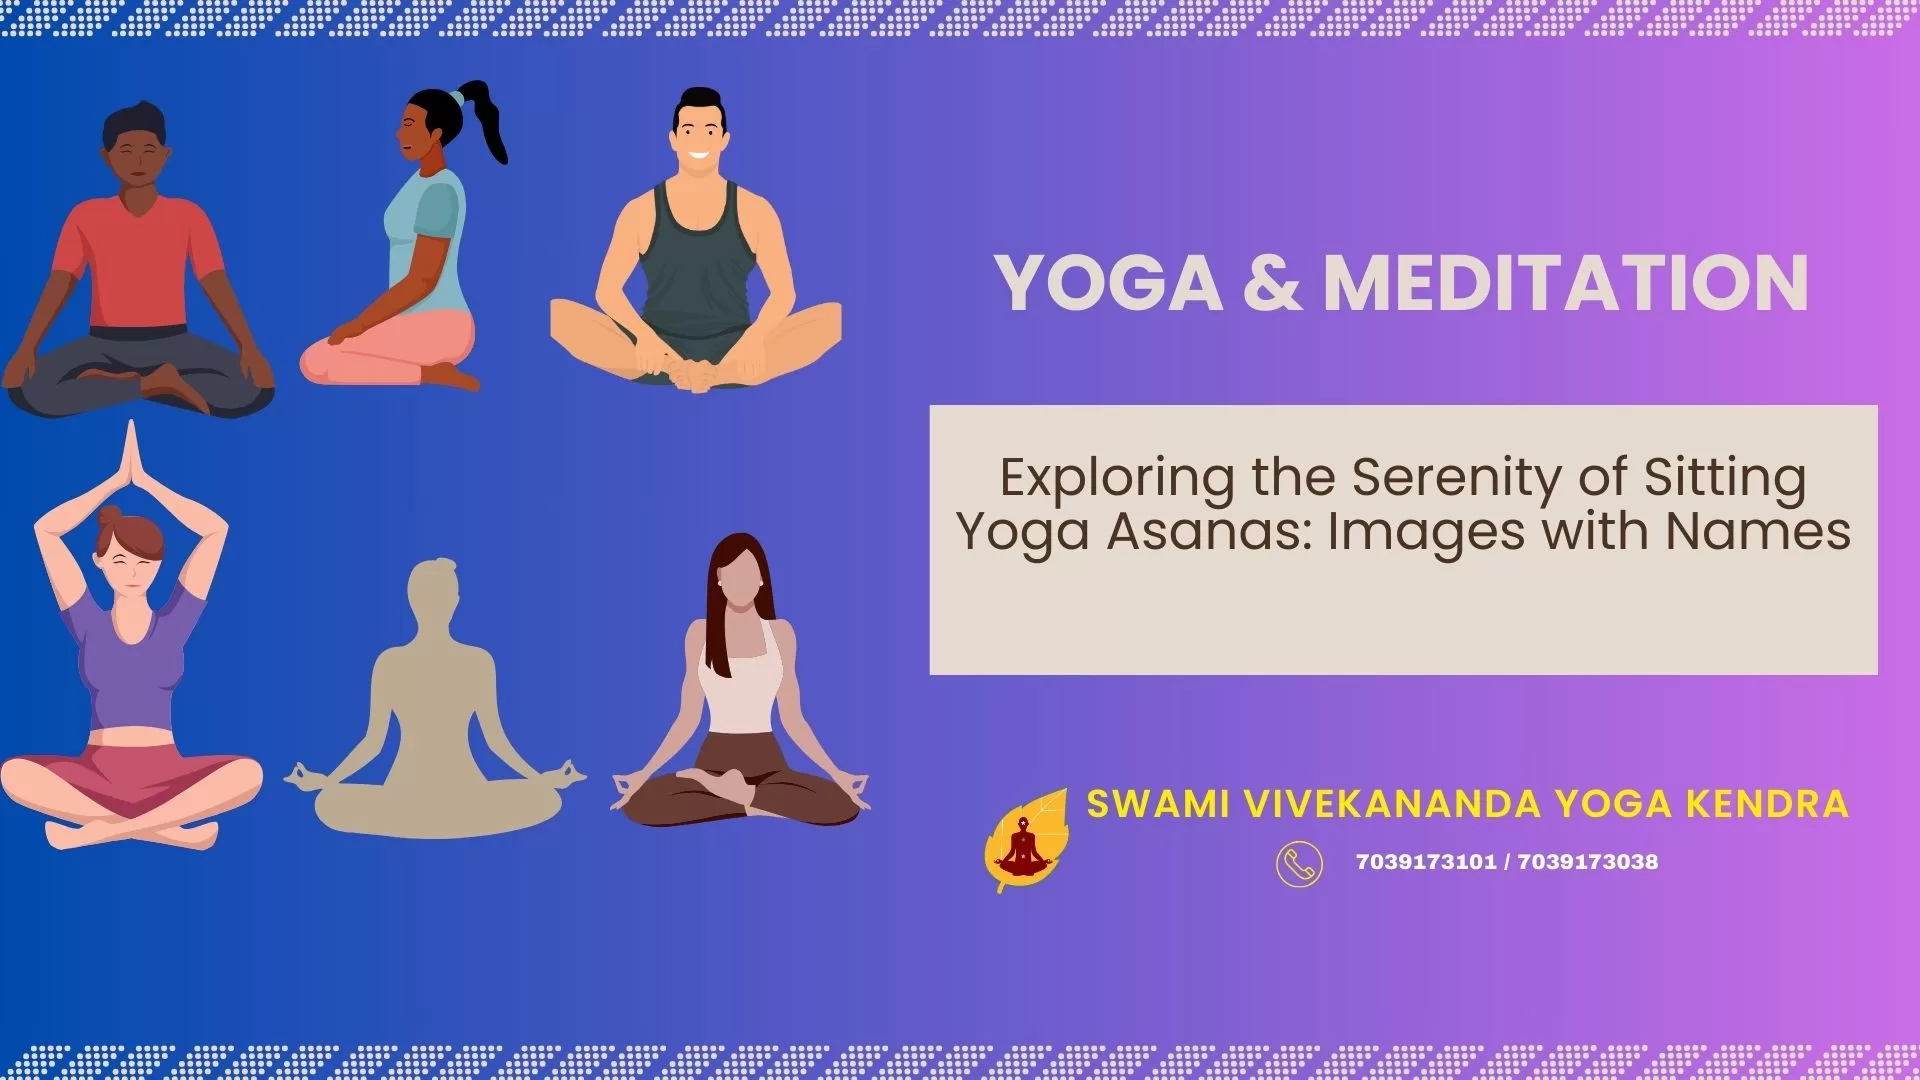 Benefits of Virabhadrasana (Warrior Pose) and How to Do it By Dr. Himani  Bisht - PharmEasy Blog